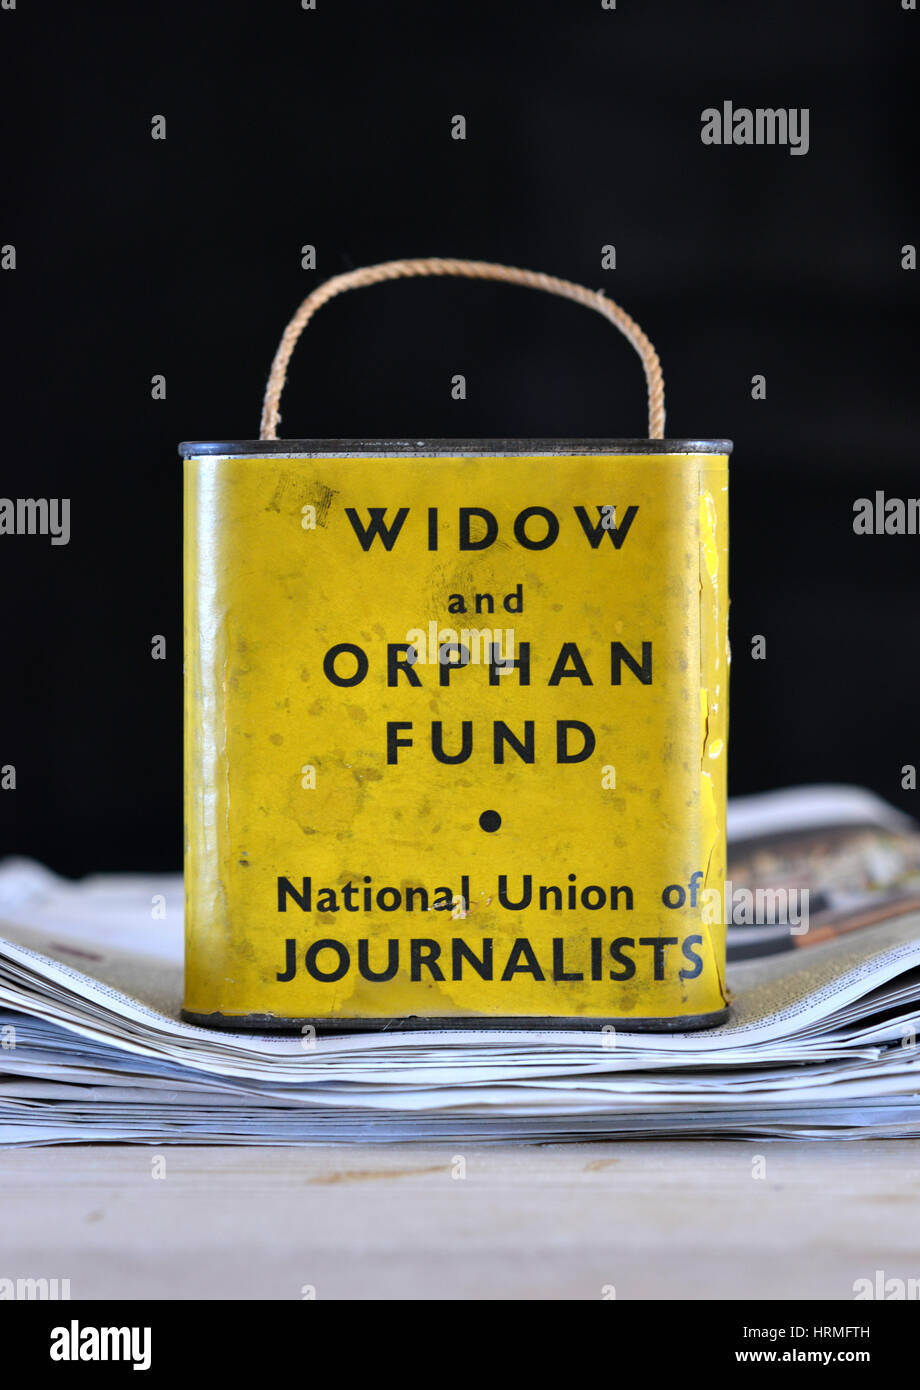 Vintage NUJ collecting tin for Widow and Orphan fund. Stock Photo